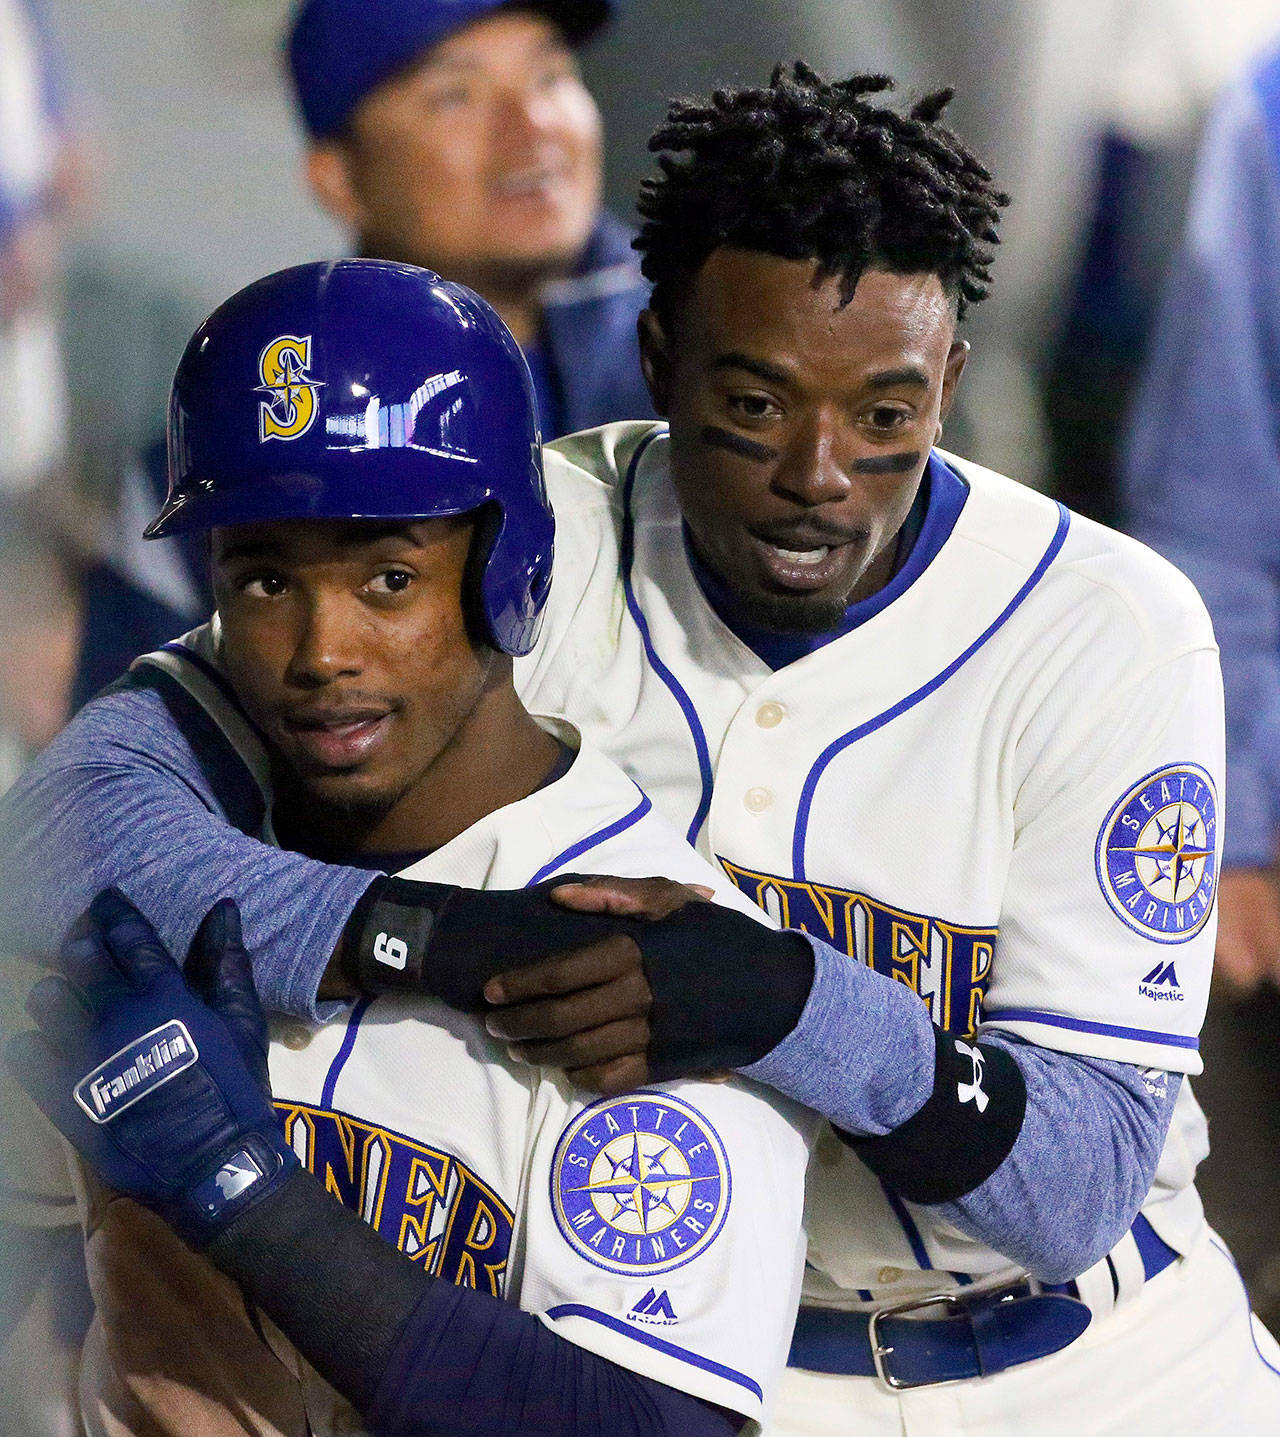 The Seattle Mariners’ Dee Gordon, right, hugs teammate Jean Segura in the dugout during a game in April. Segura has been out of the Mariners lineup since Thursday due to an infection. (Ken Lambert/Seattle Times/TNS)